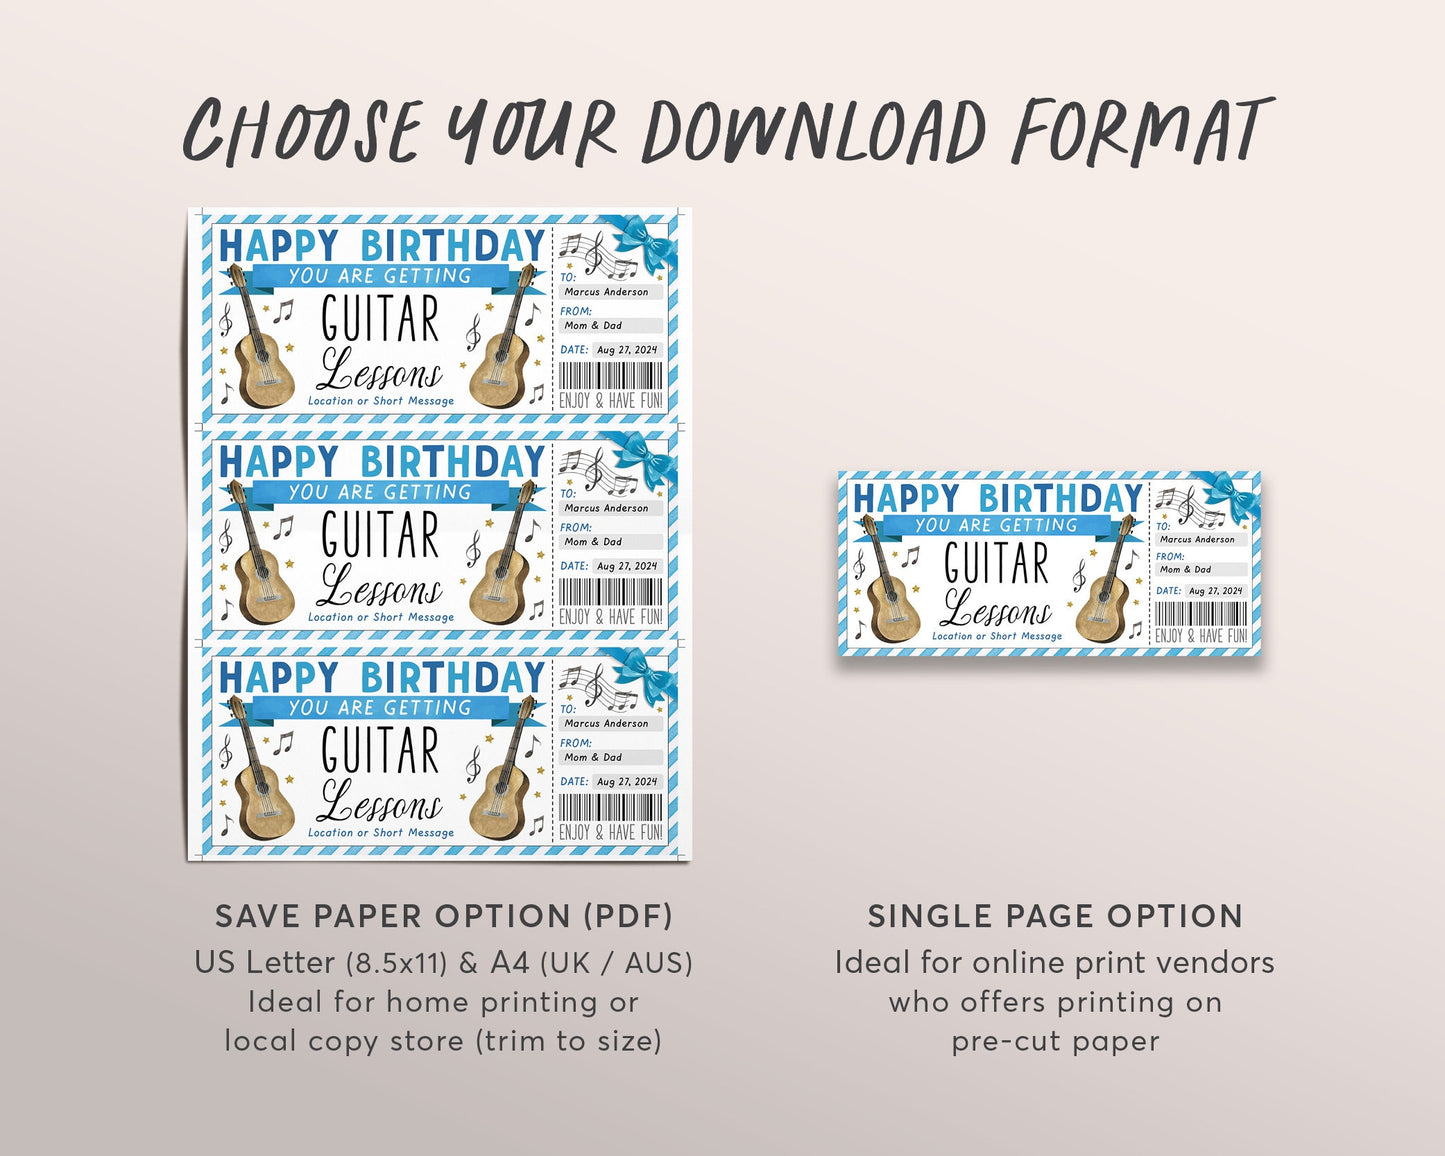 Guitar Lessons Gift Certificate Editable Template, Birthday Surprise Music Guitar Class Voucher Gift Reveal For Him, Learn to Play Coupon